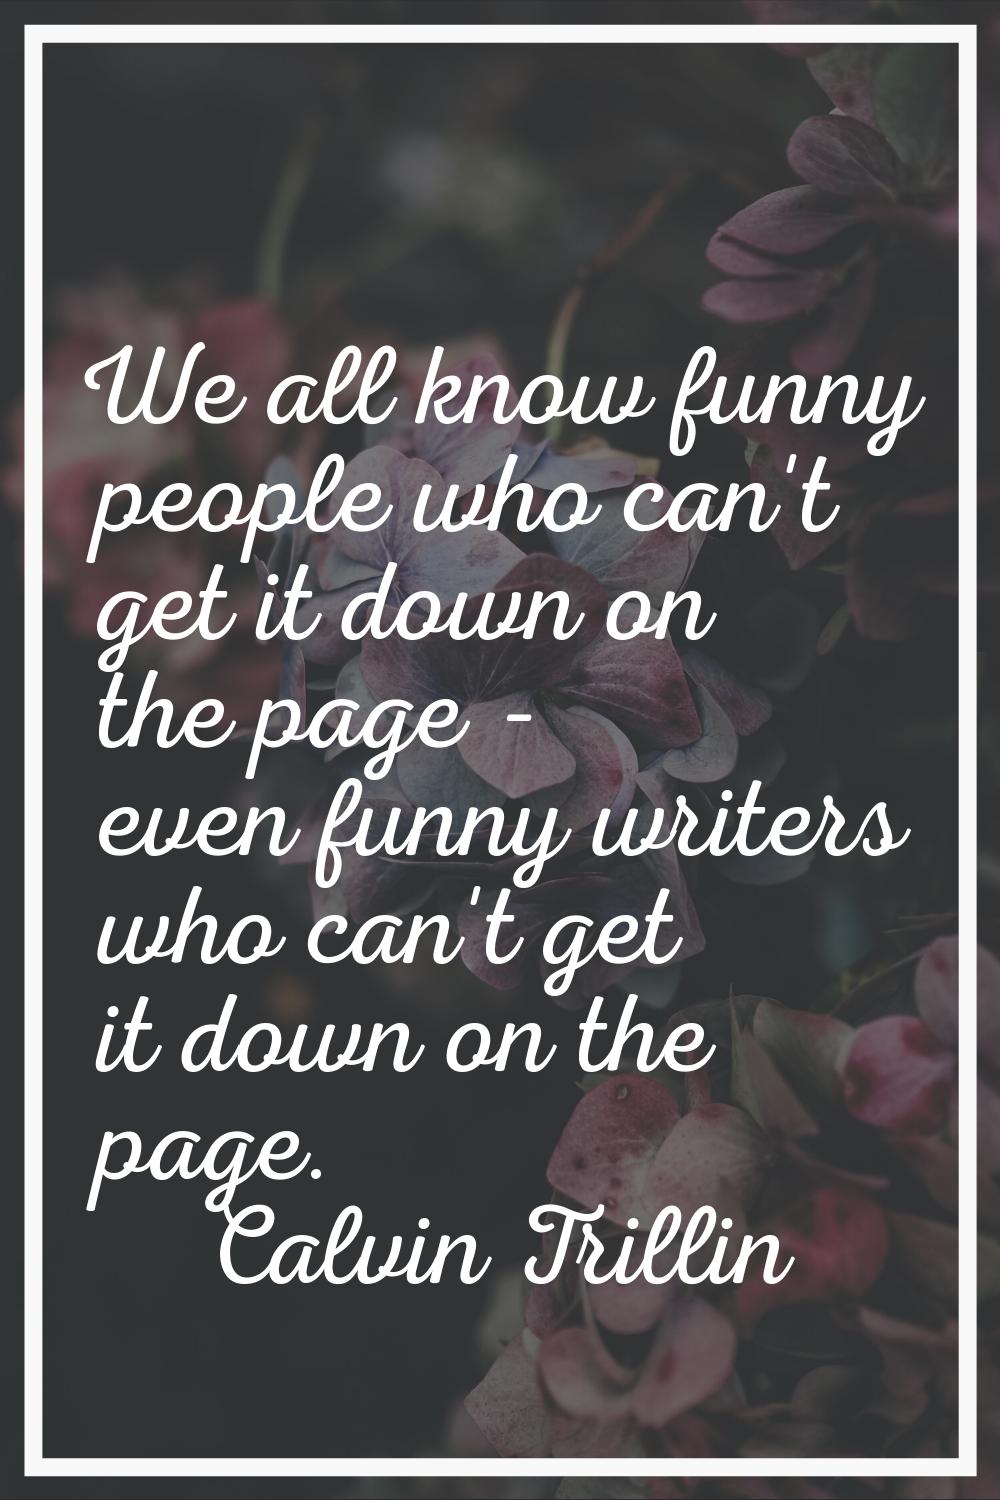 We all know funny people who can't get it down on the page - even funny writers who can't get it do